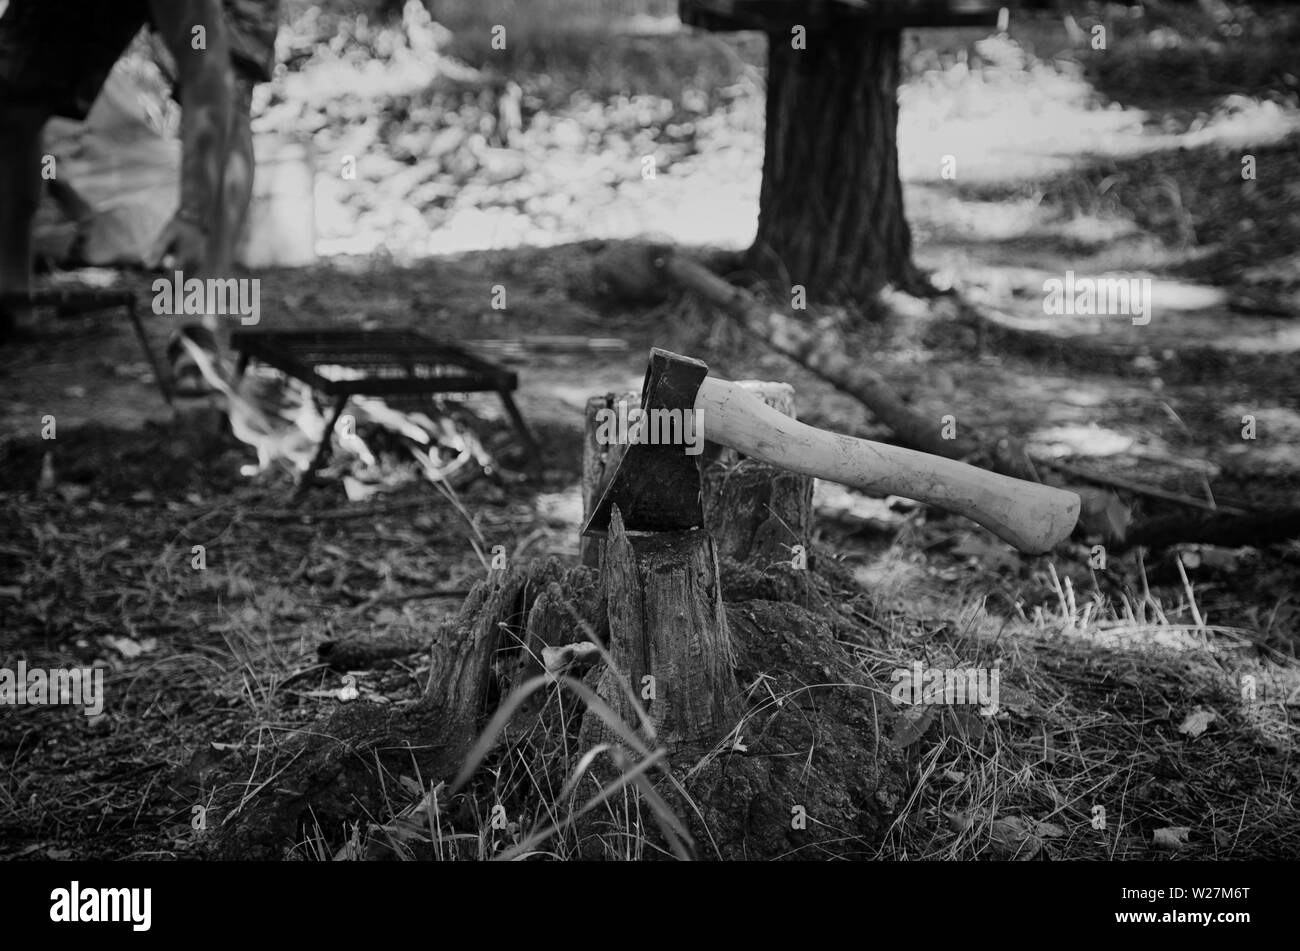 The ax stabs the stump for a picnic bonfire in black and white. Stock Photo